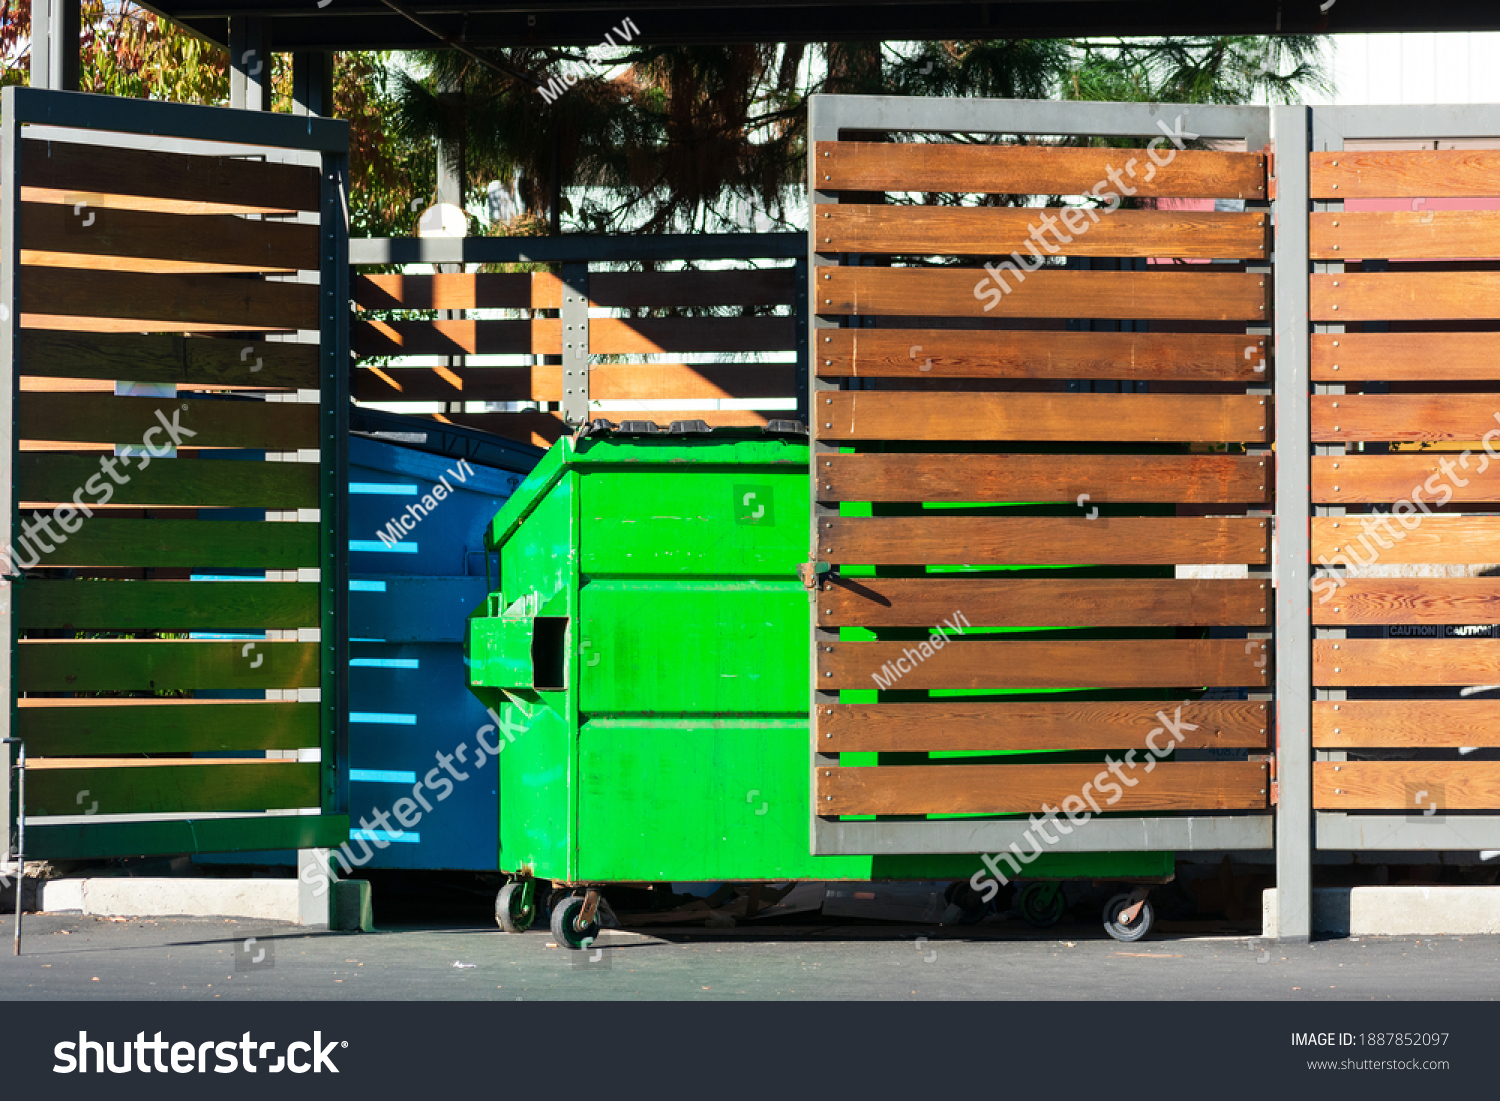 Two waste management blue and green garbage containers dumpsters in garbage enclosure used for commercial and residential garbage. #1887852097